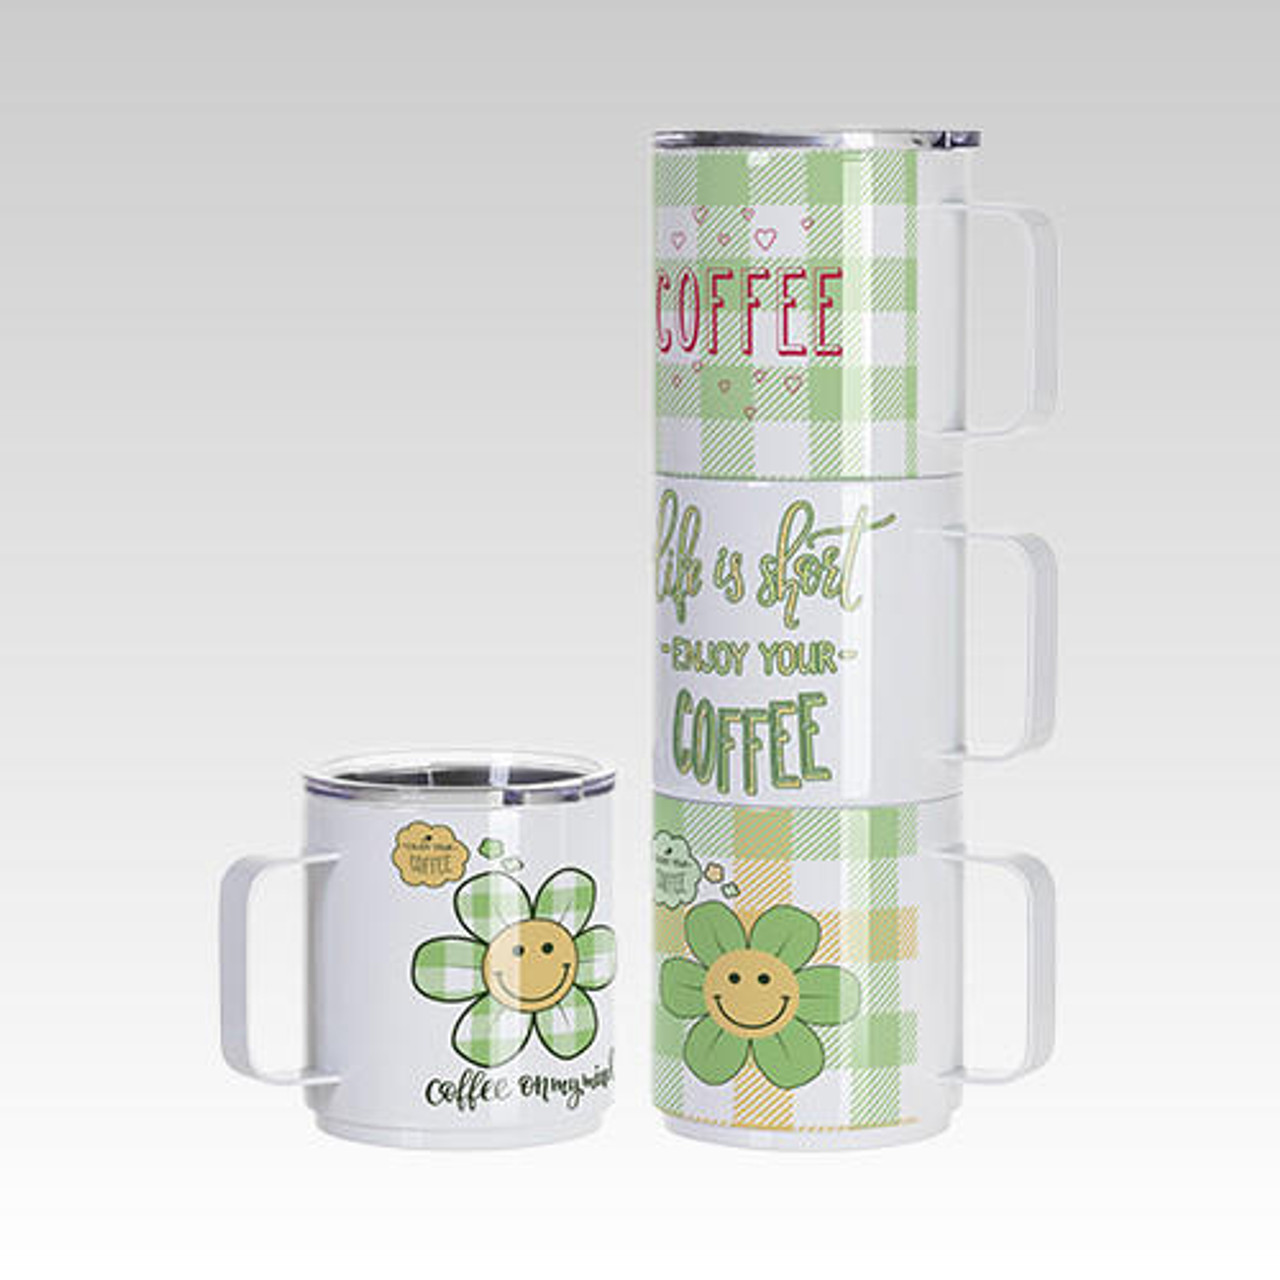 https://cdn11.bigcommerce.com/s-et4qthkygq/images/stencil/1280x1280/products/9877/34386/walablanks-stackable-stainless-steel-coffee-mug-13oz__80212.1661357141.jpg?c=2